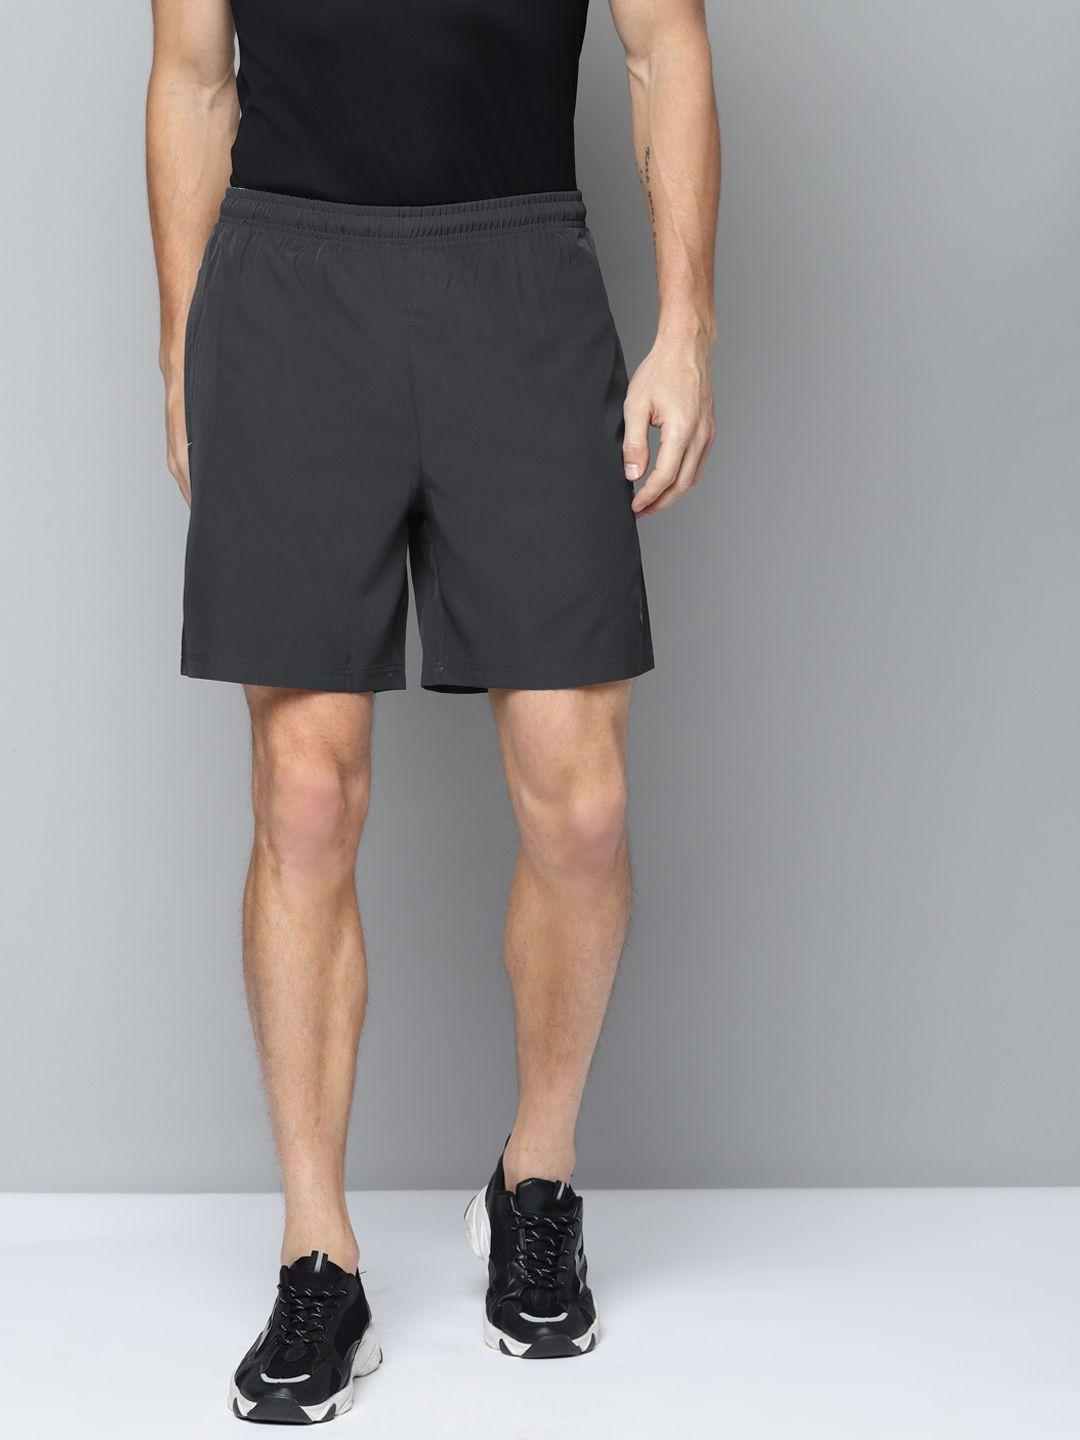 alcis-men-charcoal-grey-solid-slim-fit-running-sports-shorts